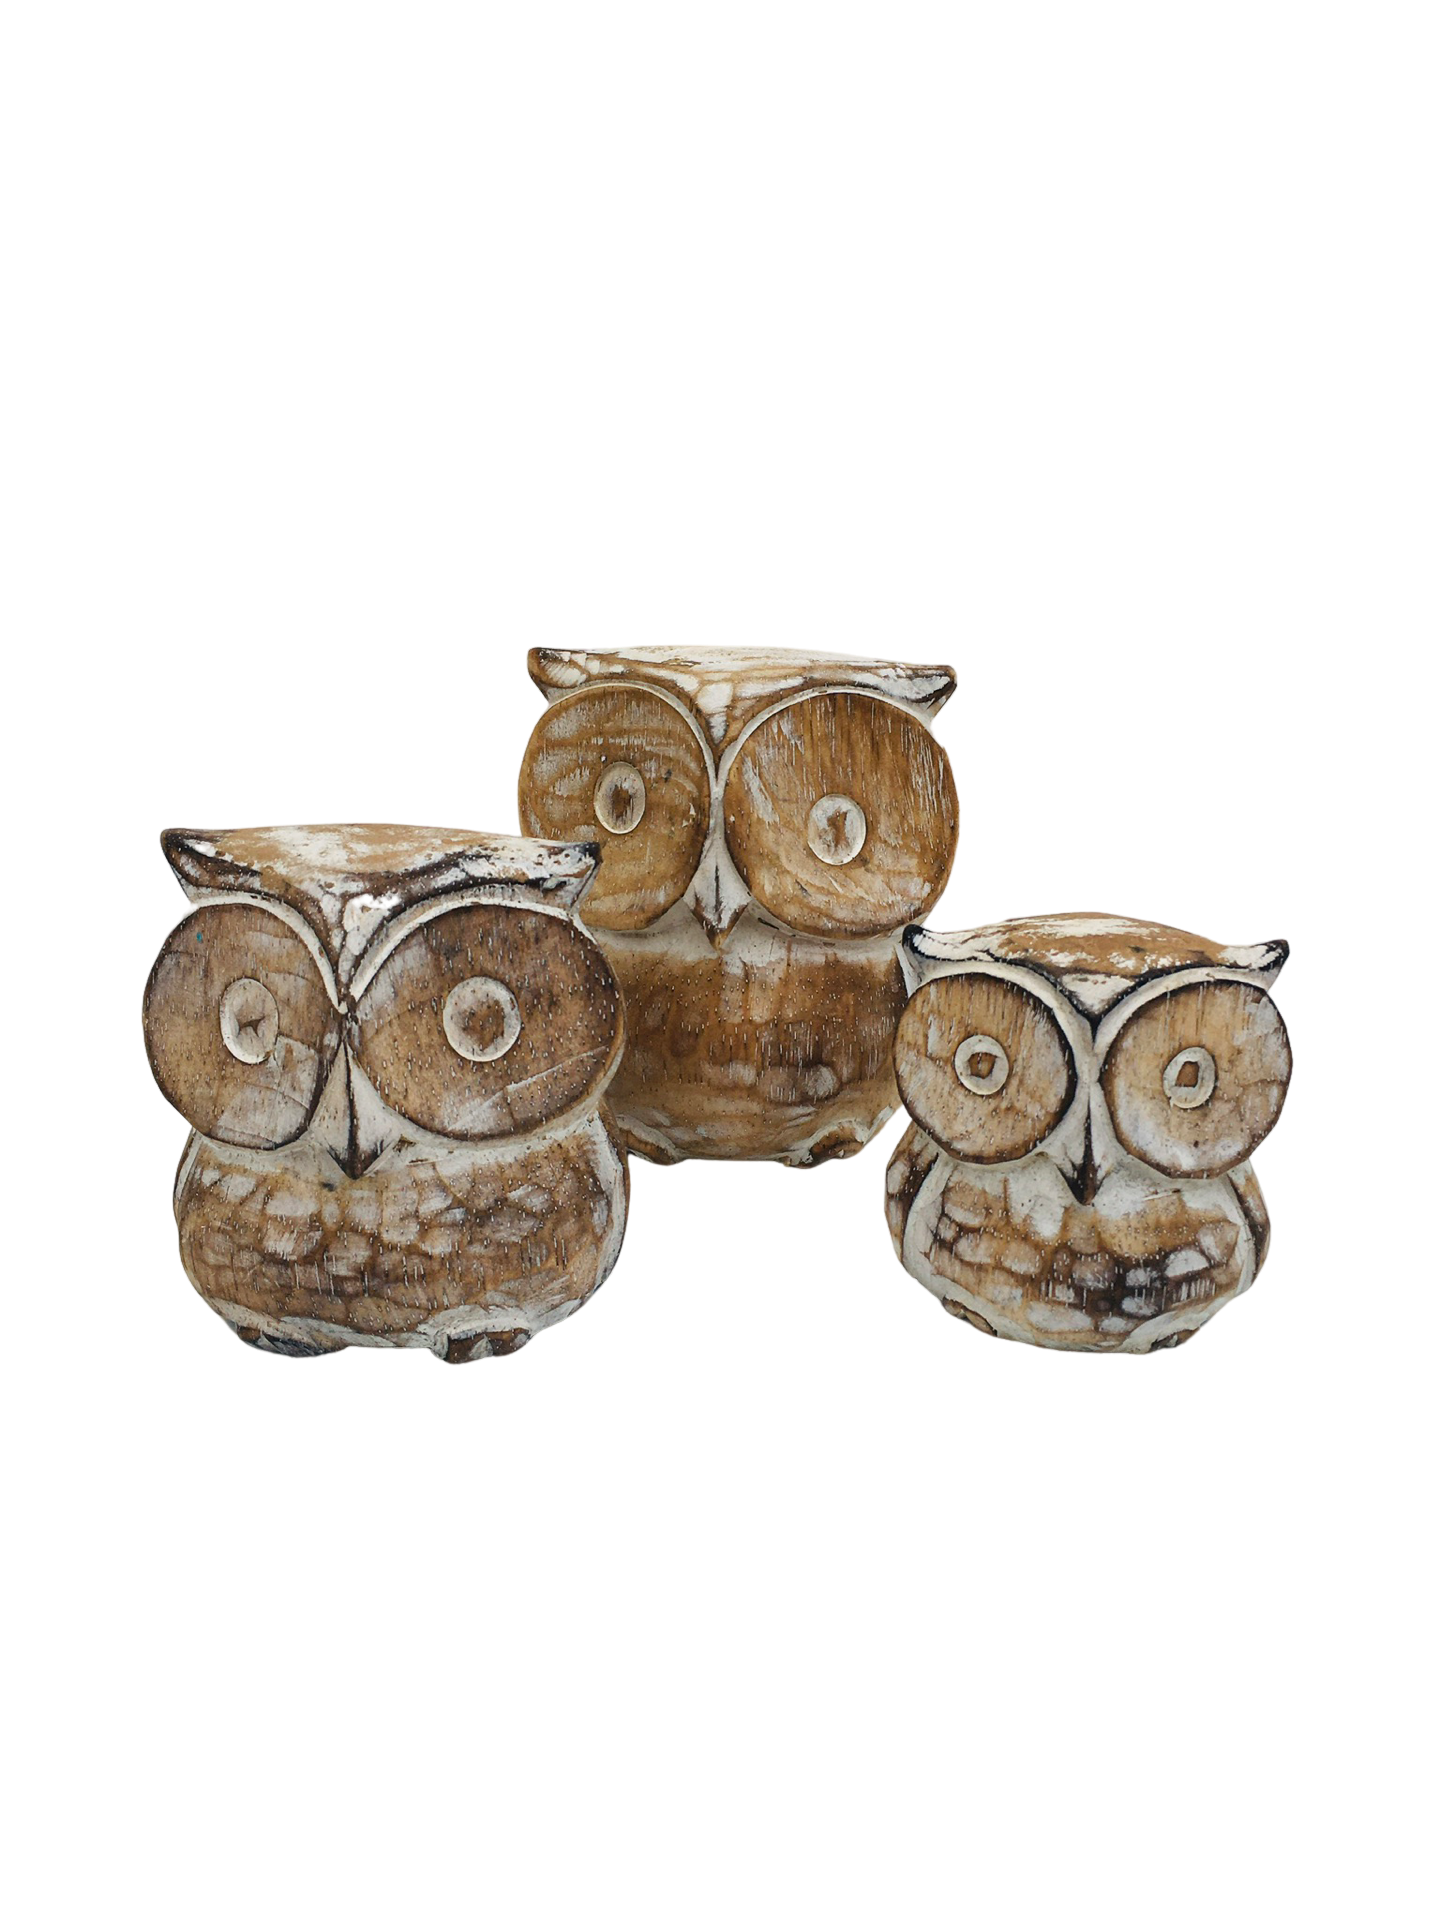 Set of three wooden carved owls. Available in a brown or white finish.